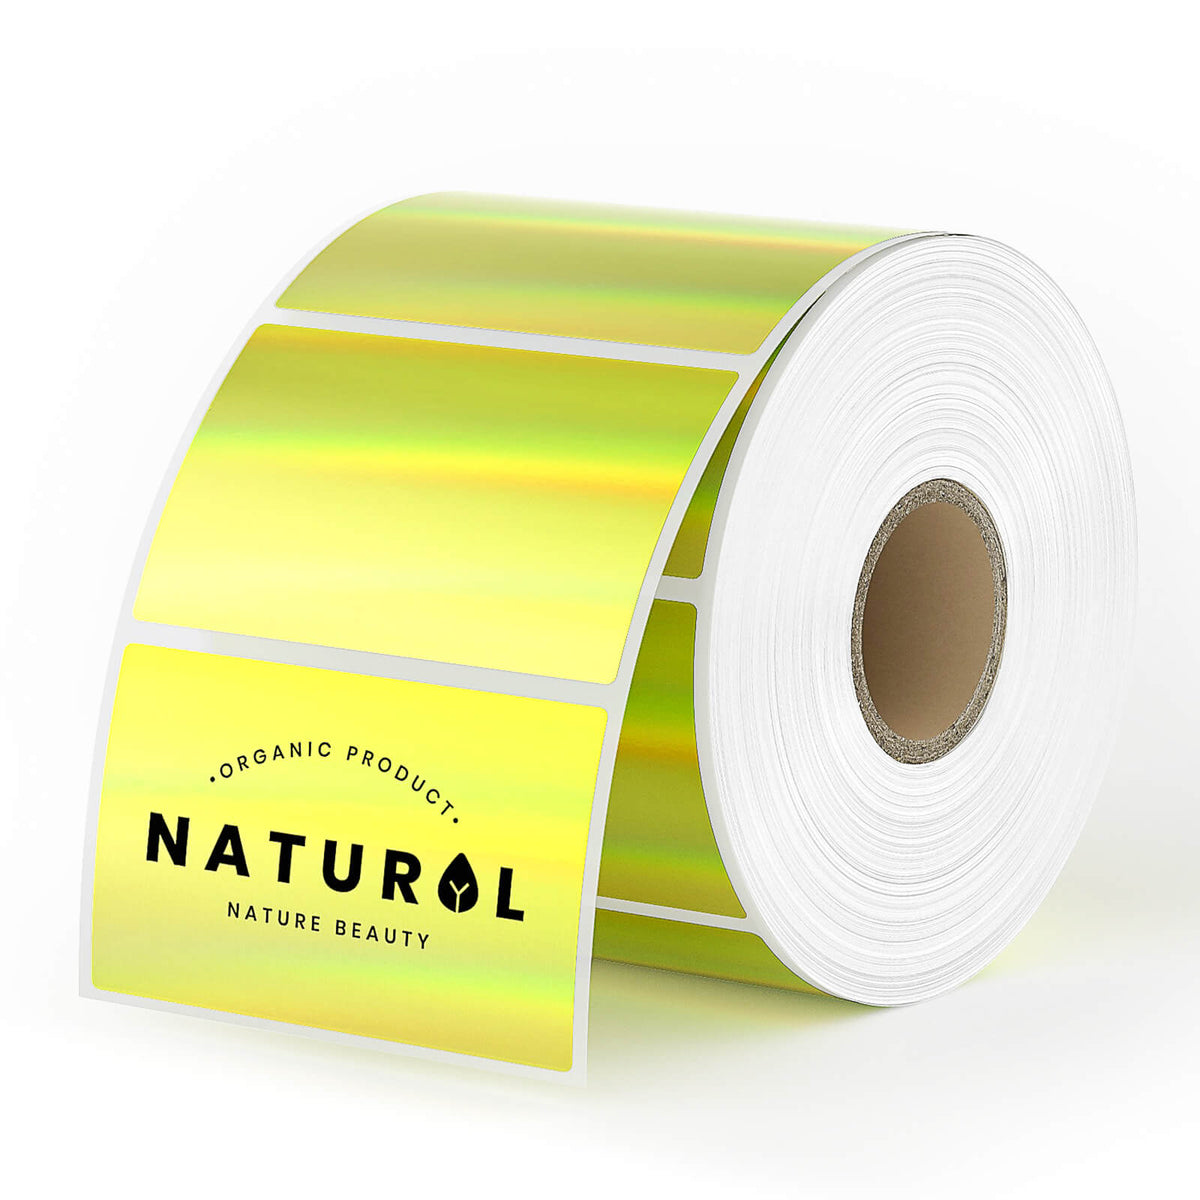 MUNBYN rectangular gold holographic thermal labels measure 57mm x 32mm, an ideal size for various labeling tasks.